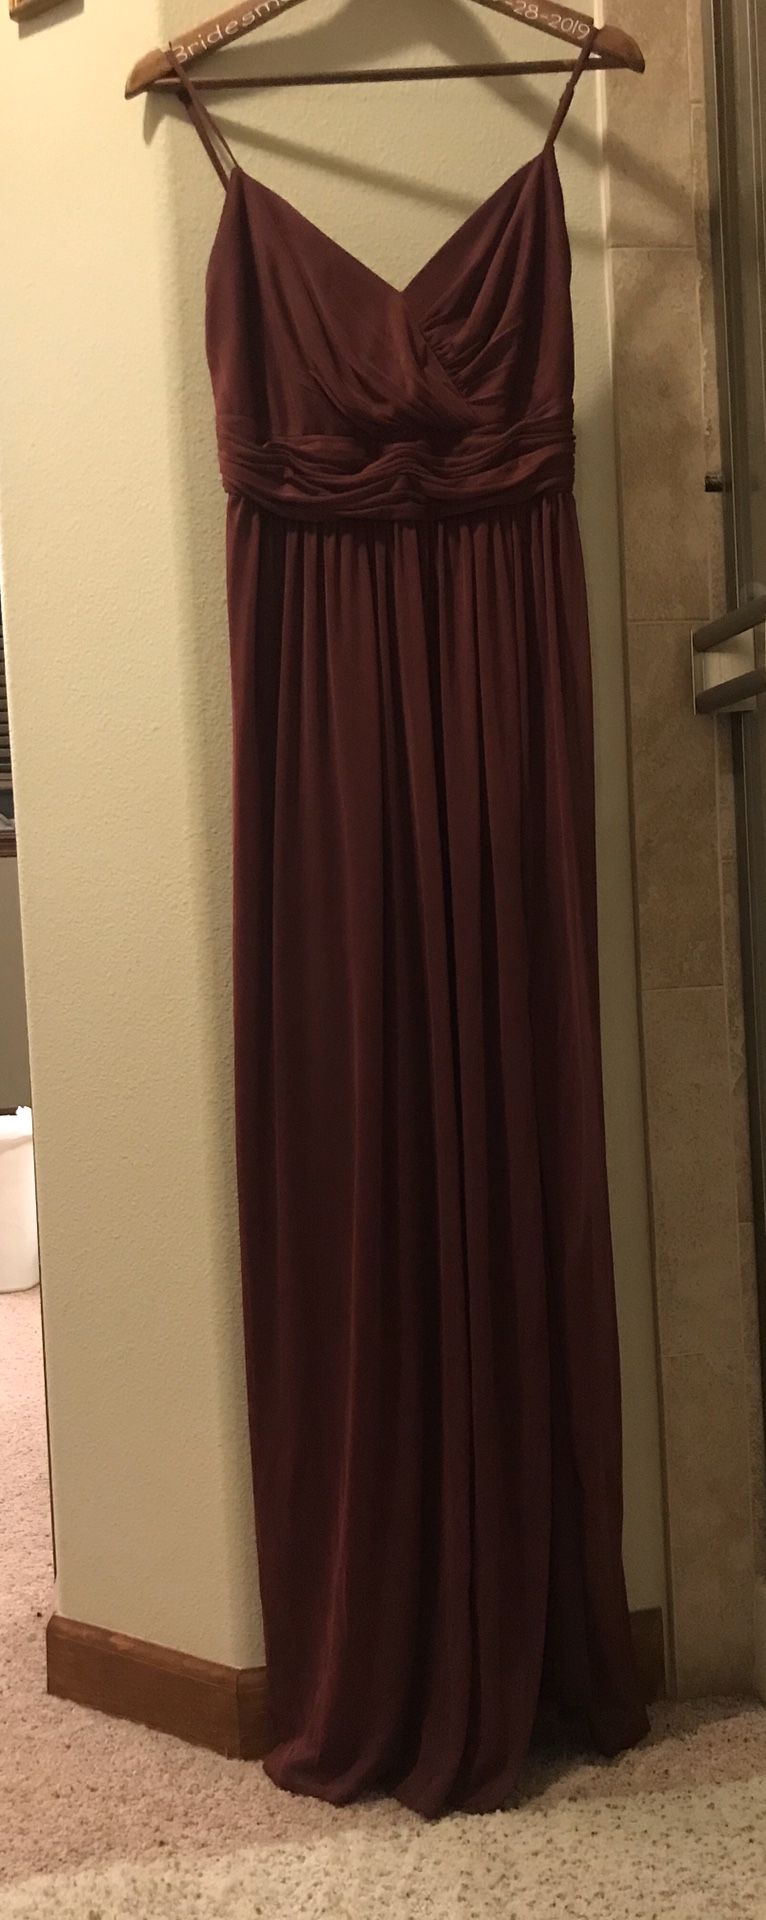 Absolutely Gorgeous Prom/Party Burgundy Dress Size 8